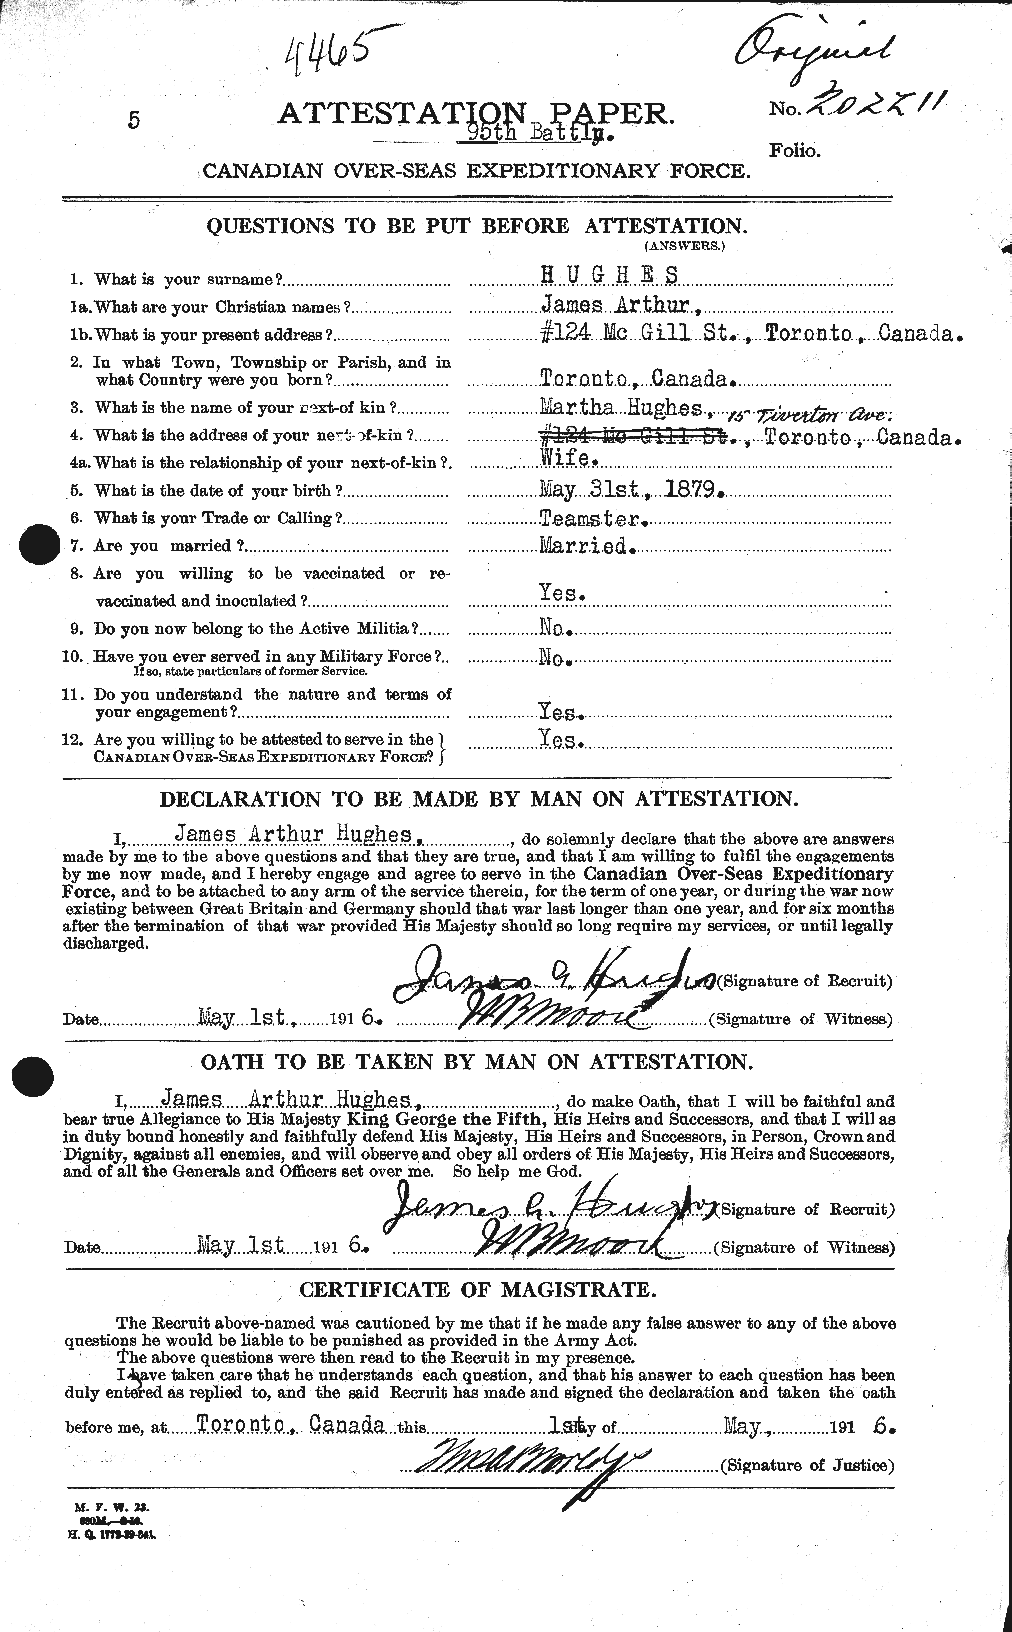 Personnel Records of the First World War - CEF 403956a